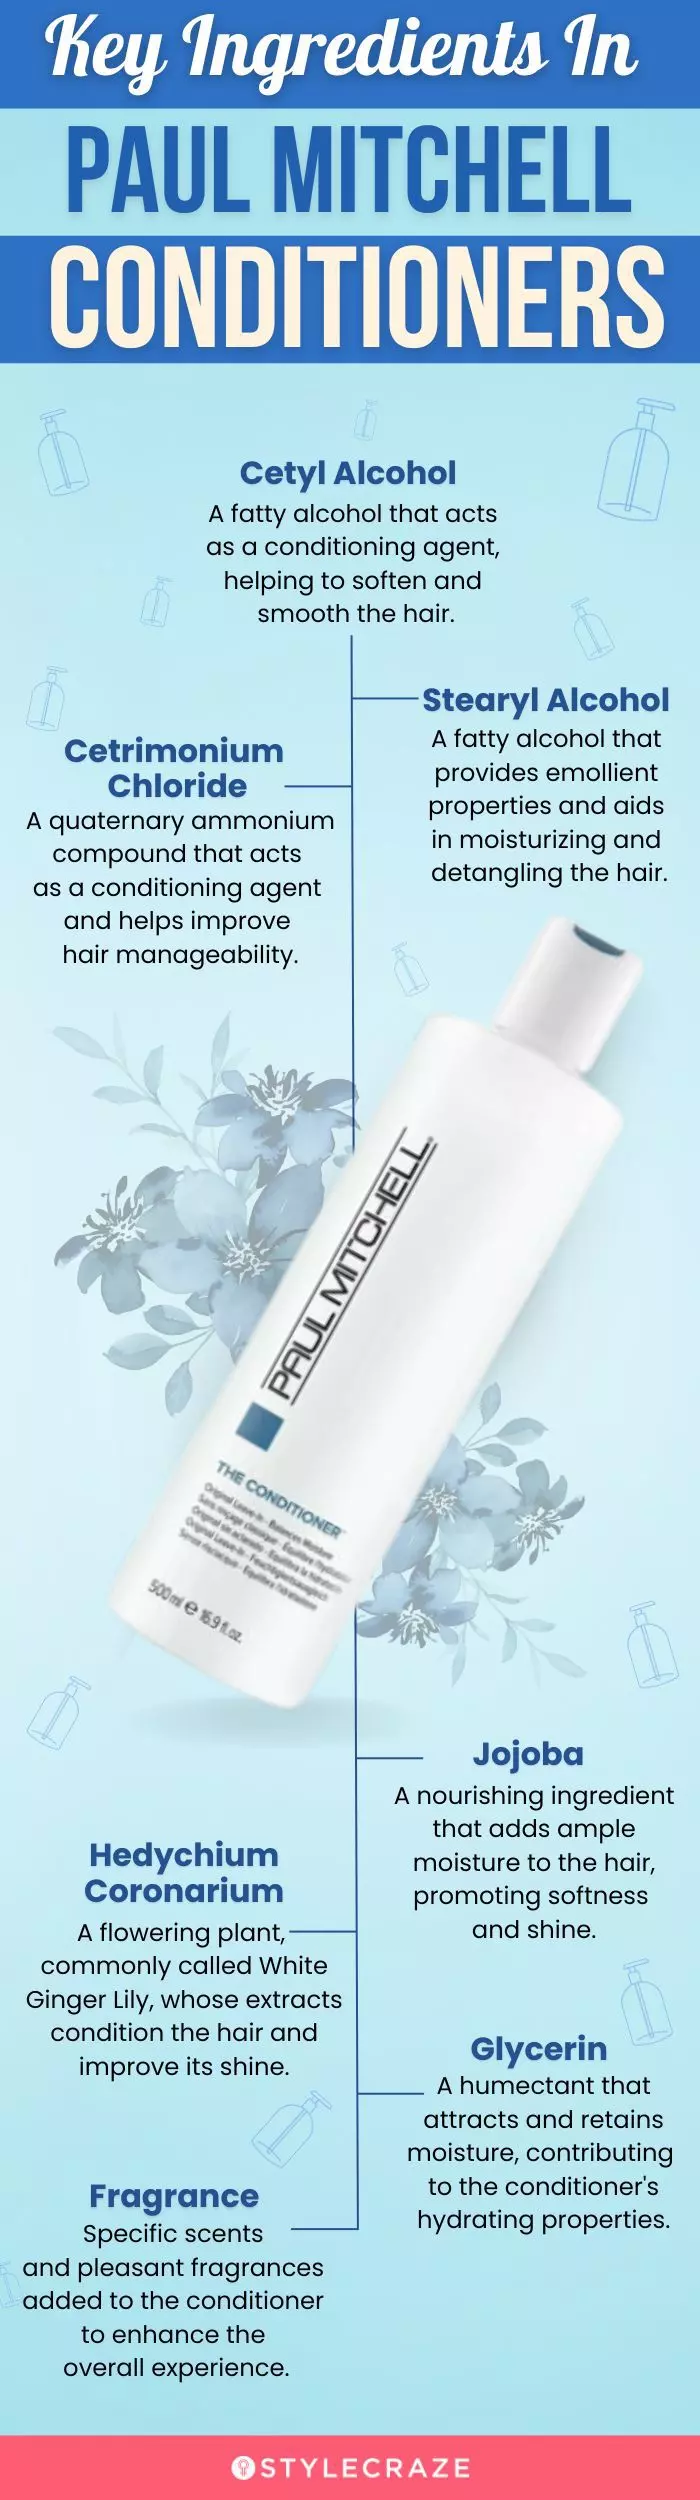 Key Ingredients In Paul Mitchell Conditioners (infographic)